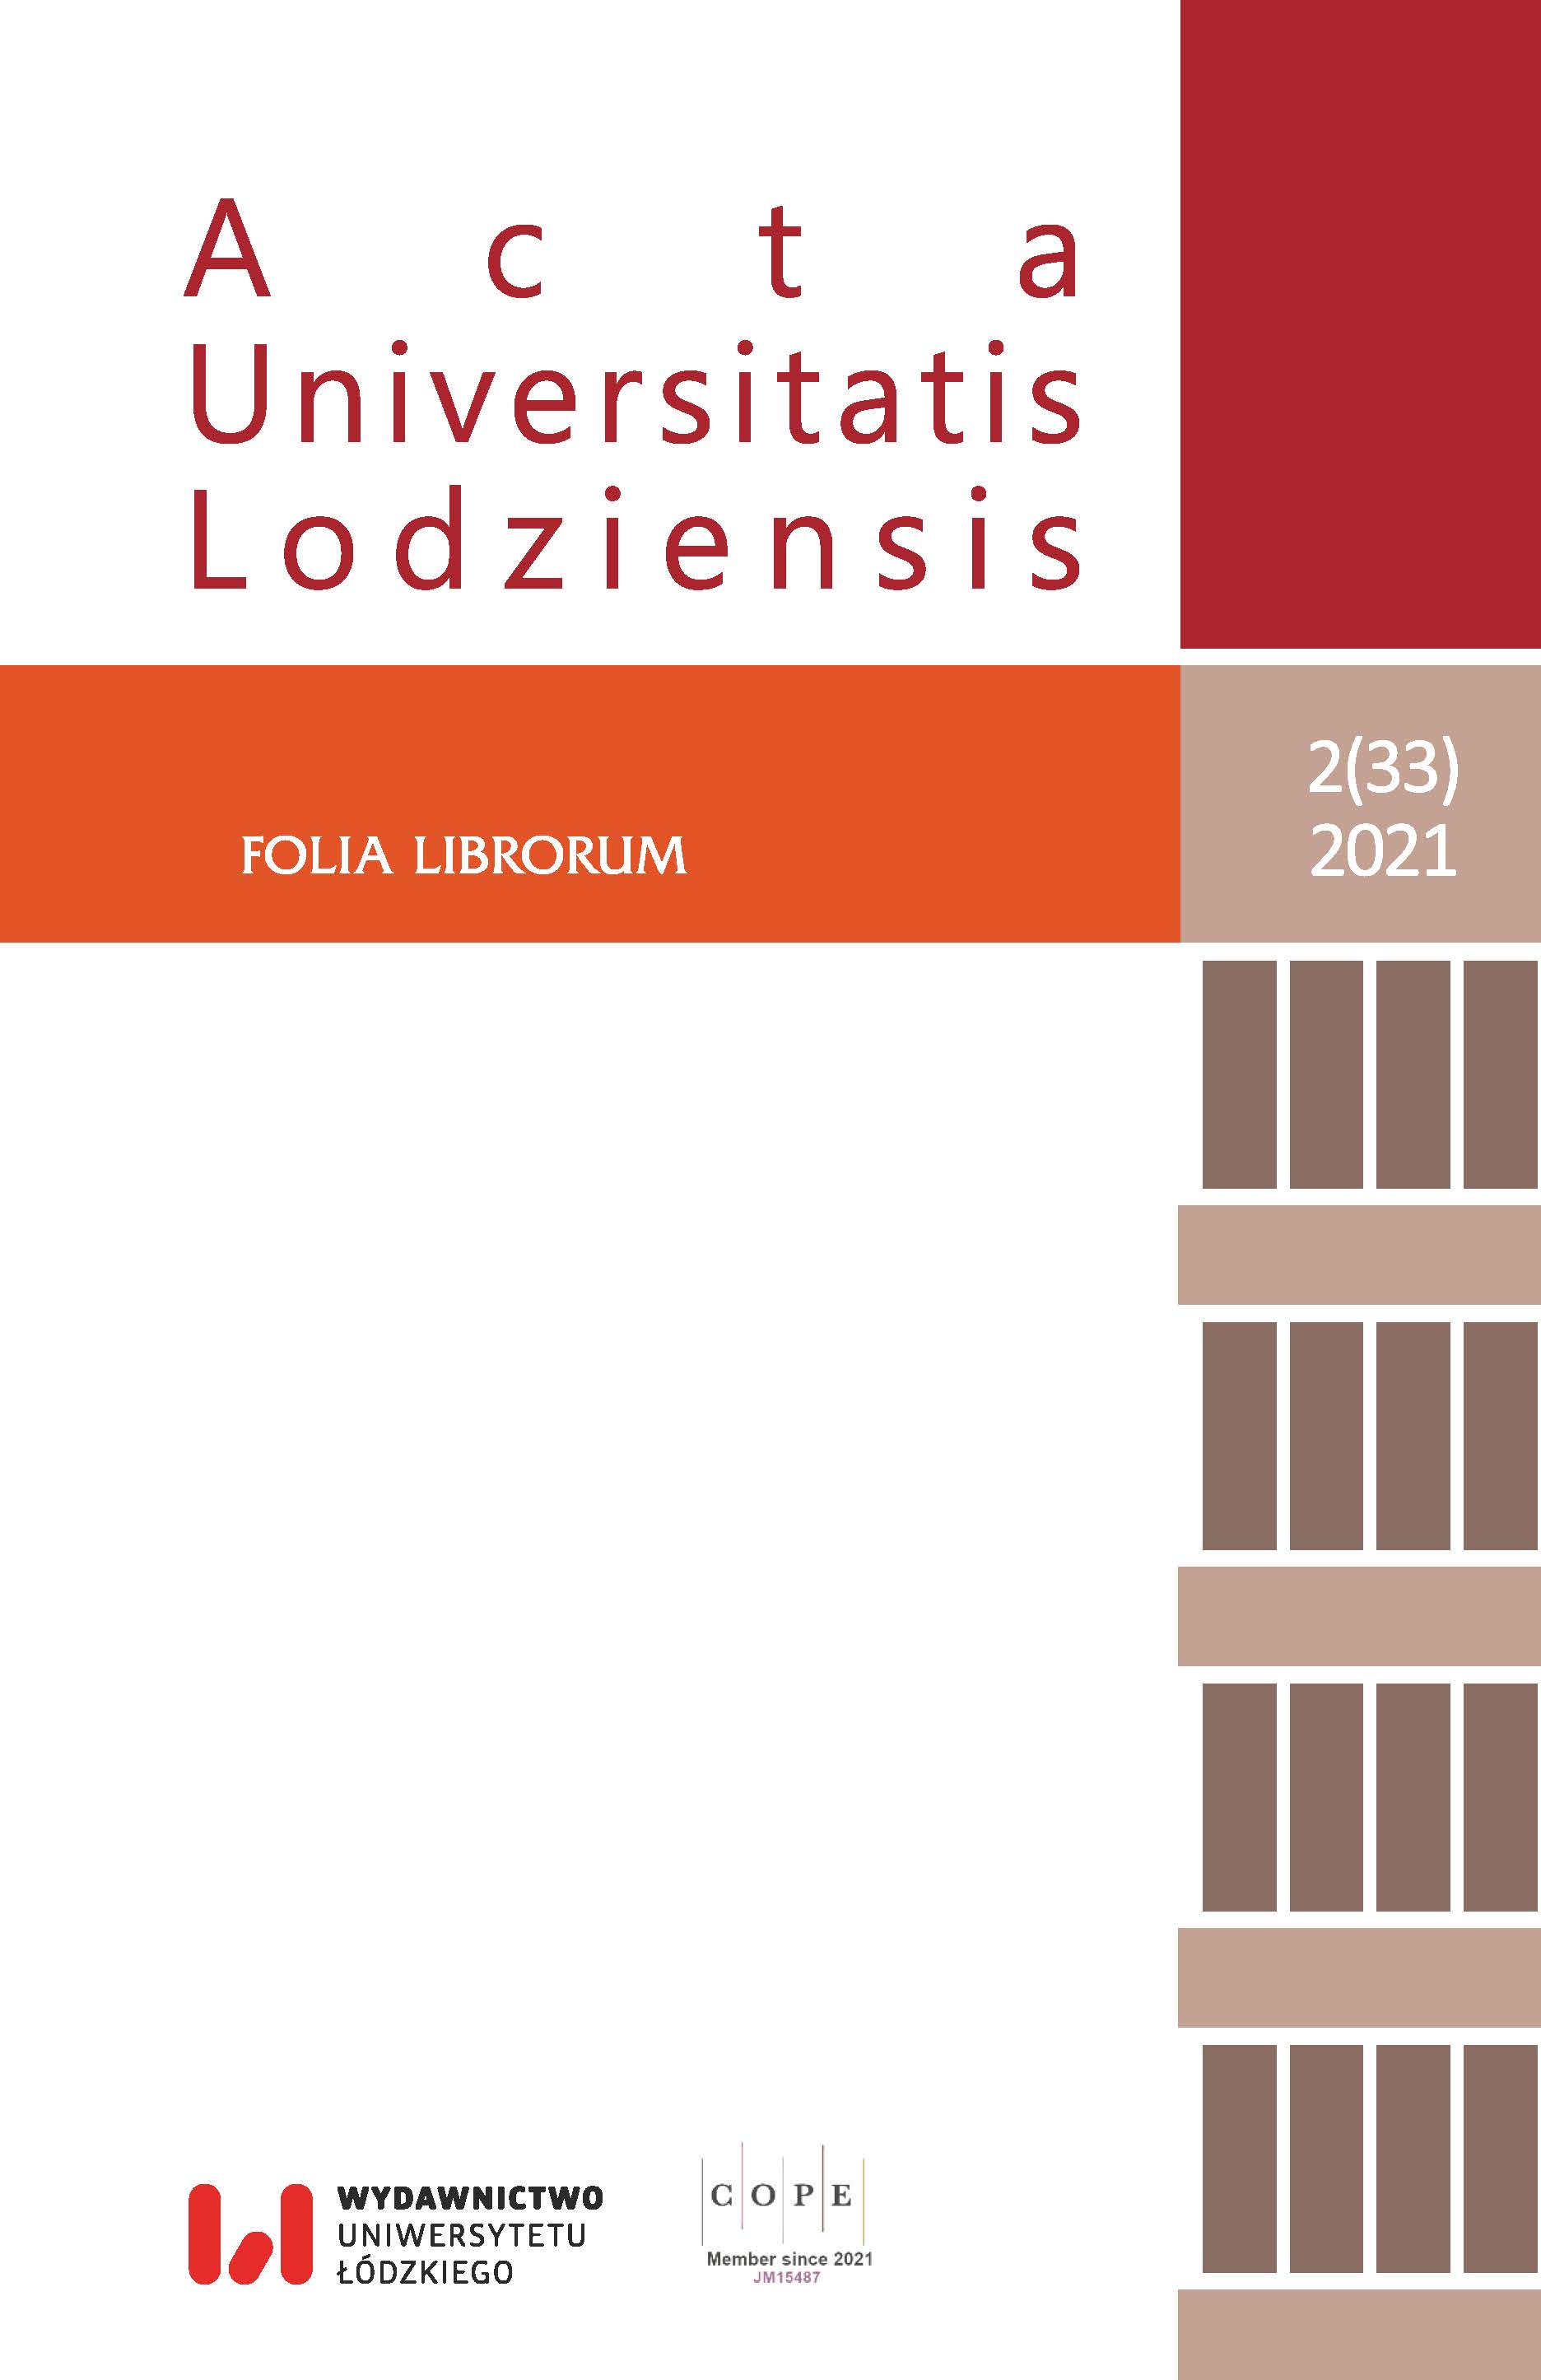 Online conferences and trainings in the field of LIS organized in Poland in 2020–2021 Cover Image